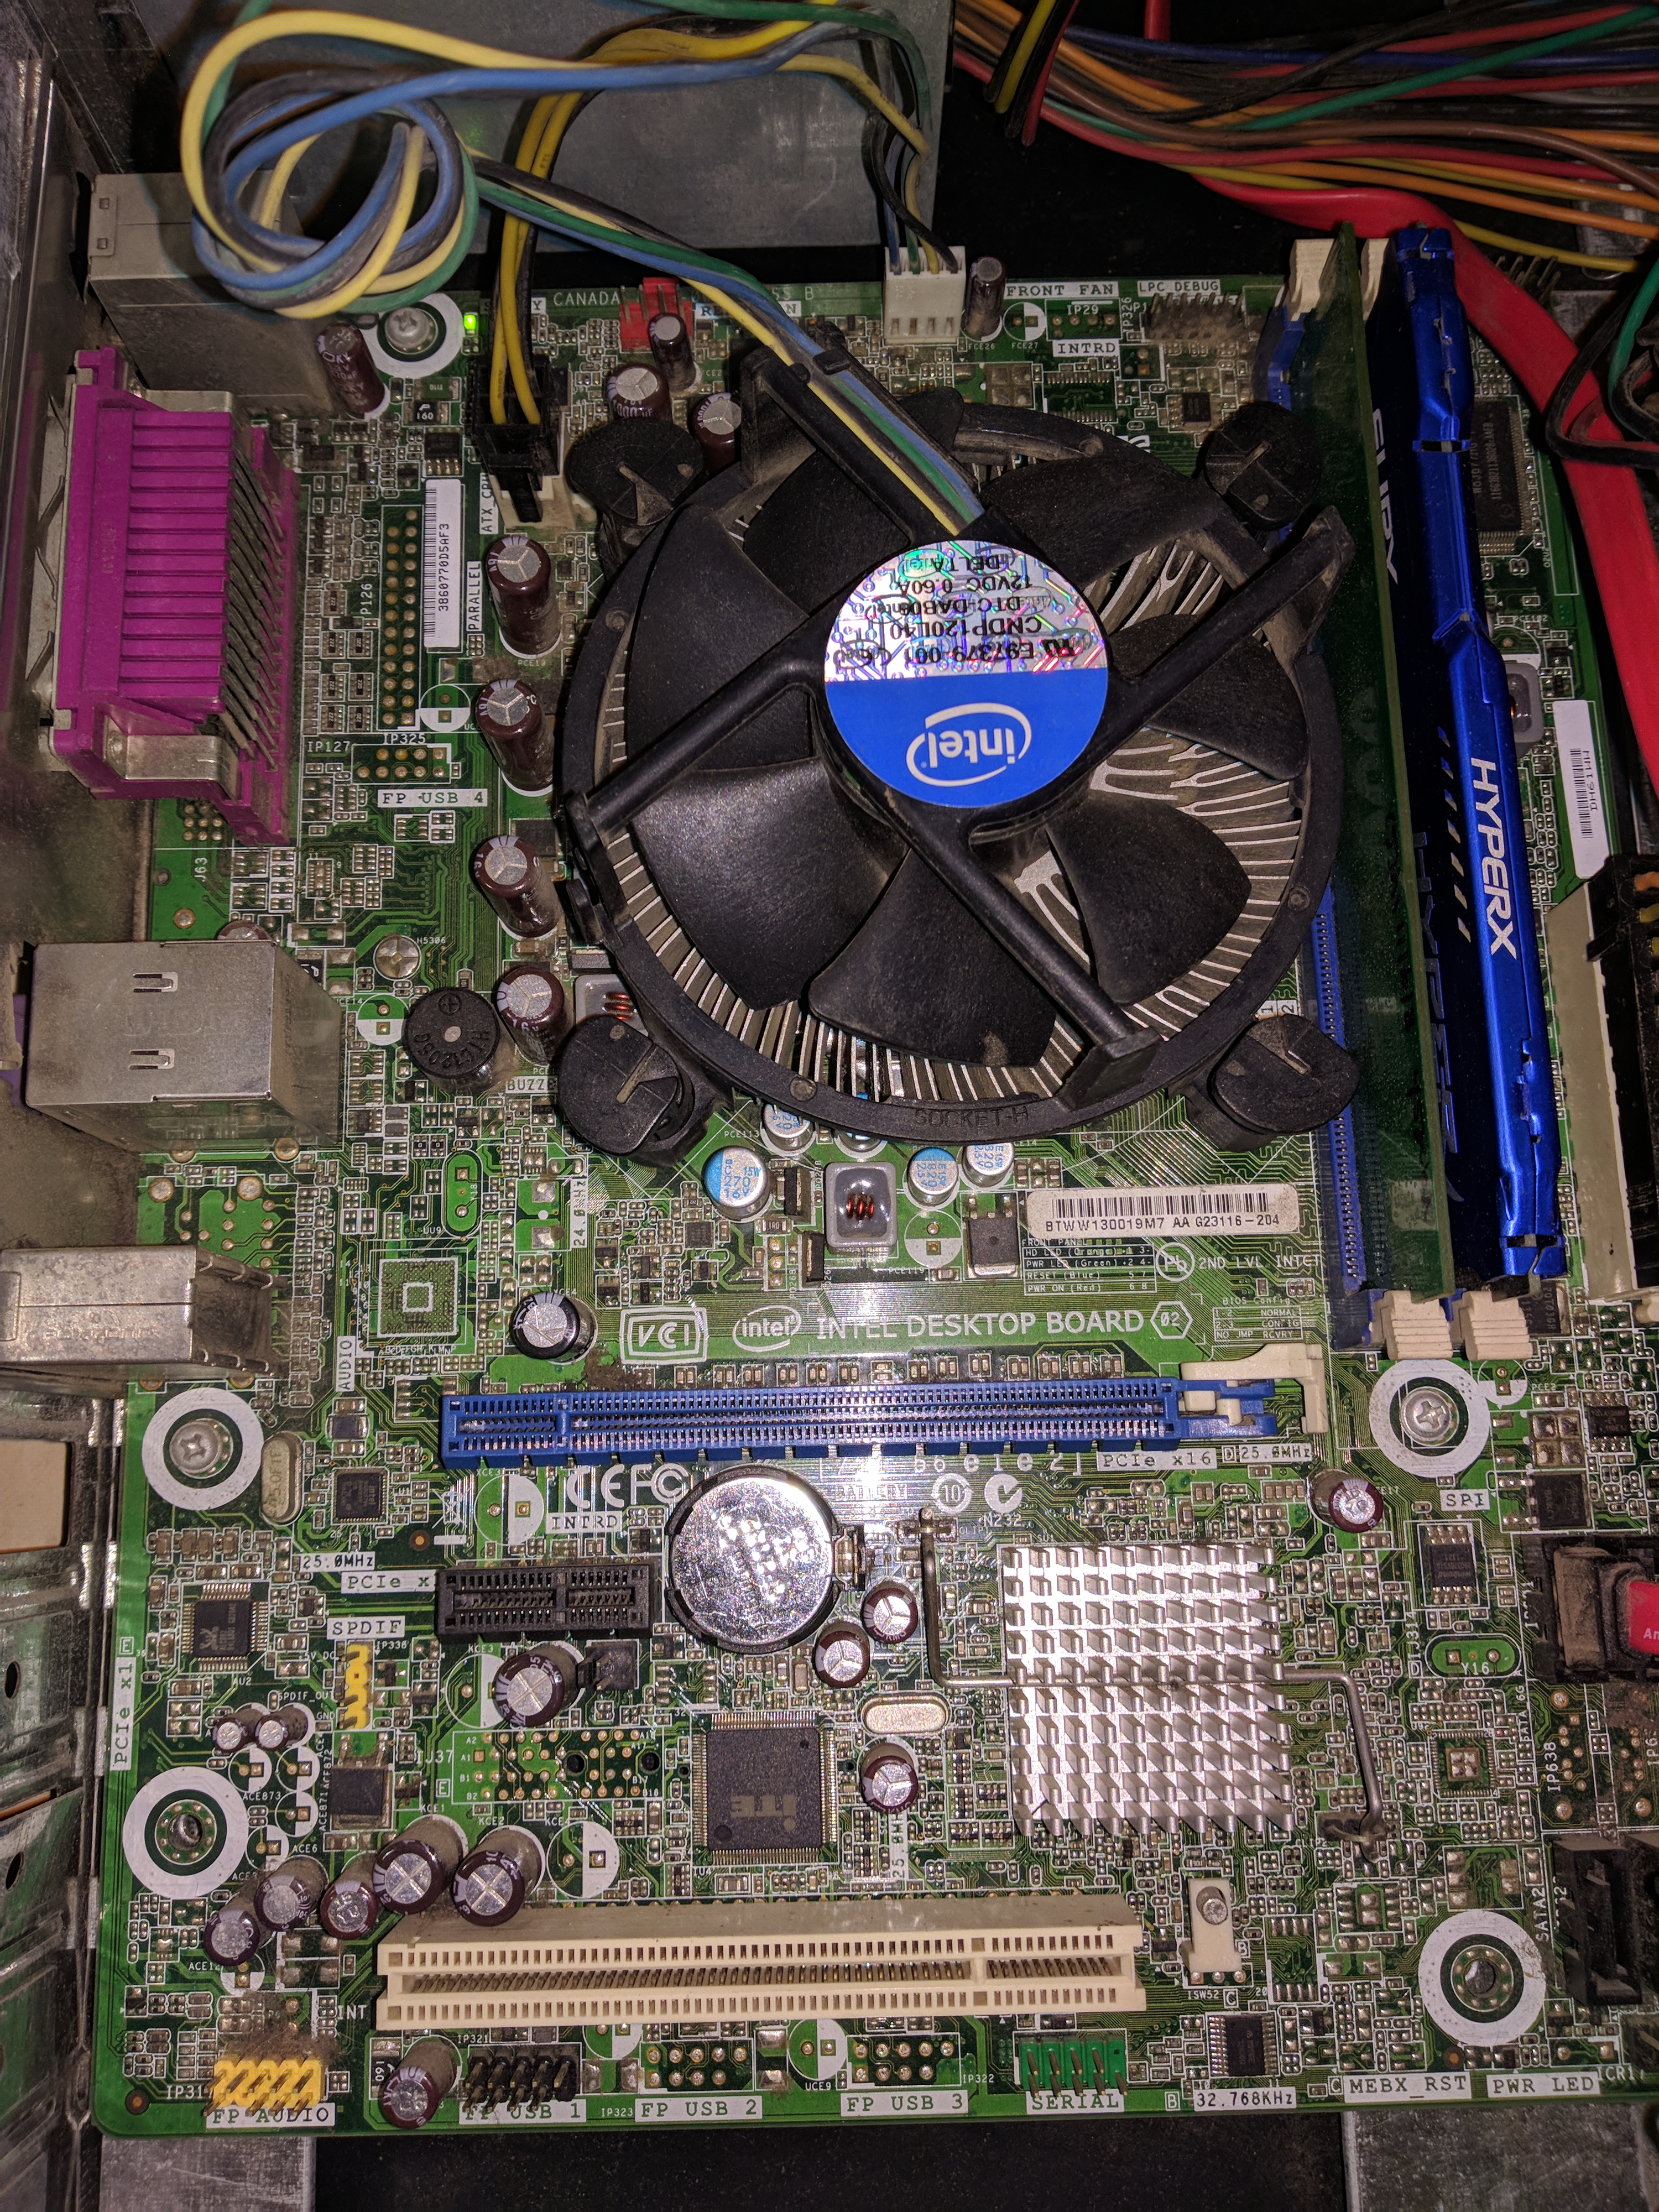 What GPU does my Motherboard support? budget level (not focused on